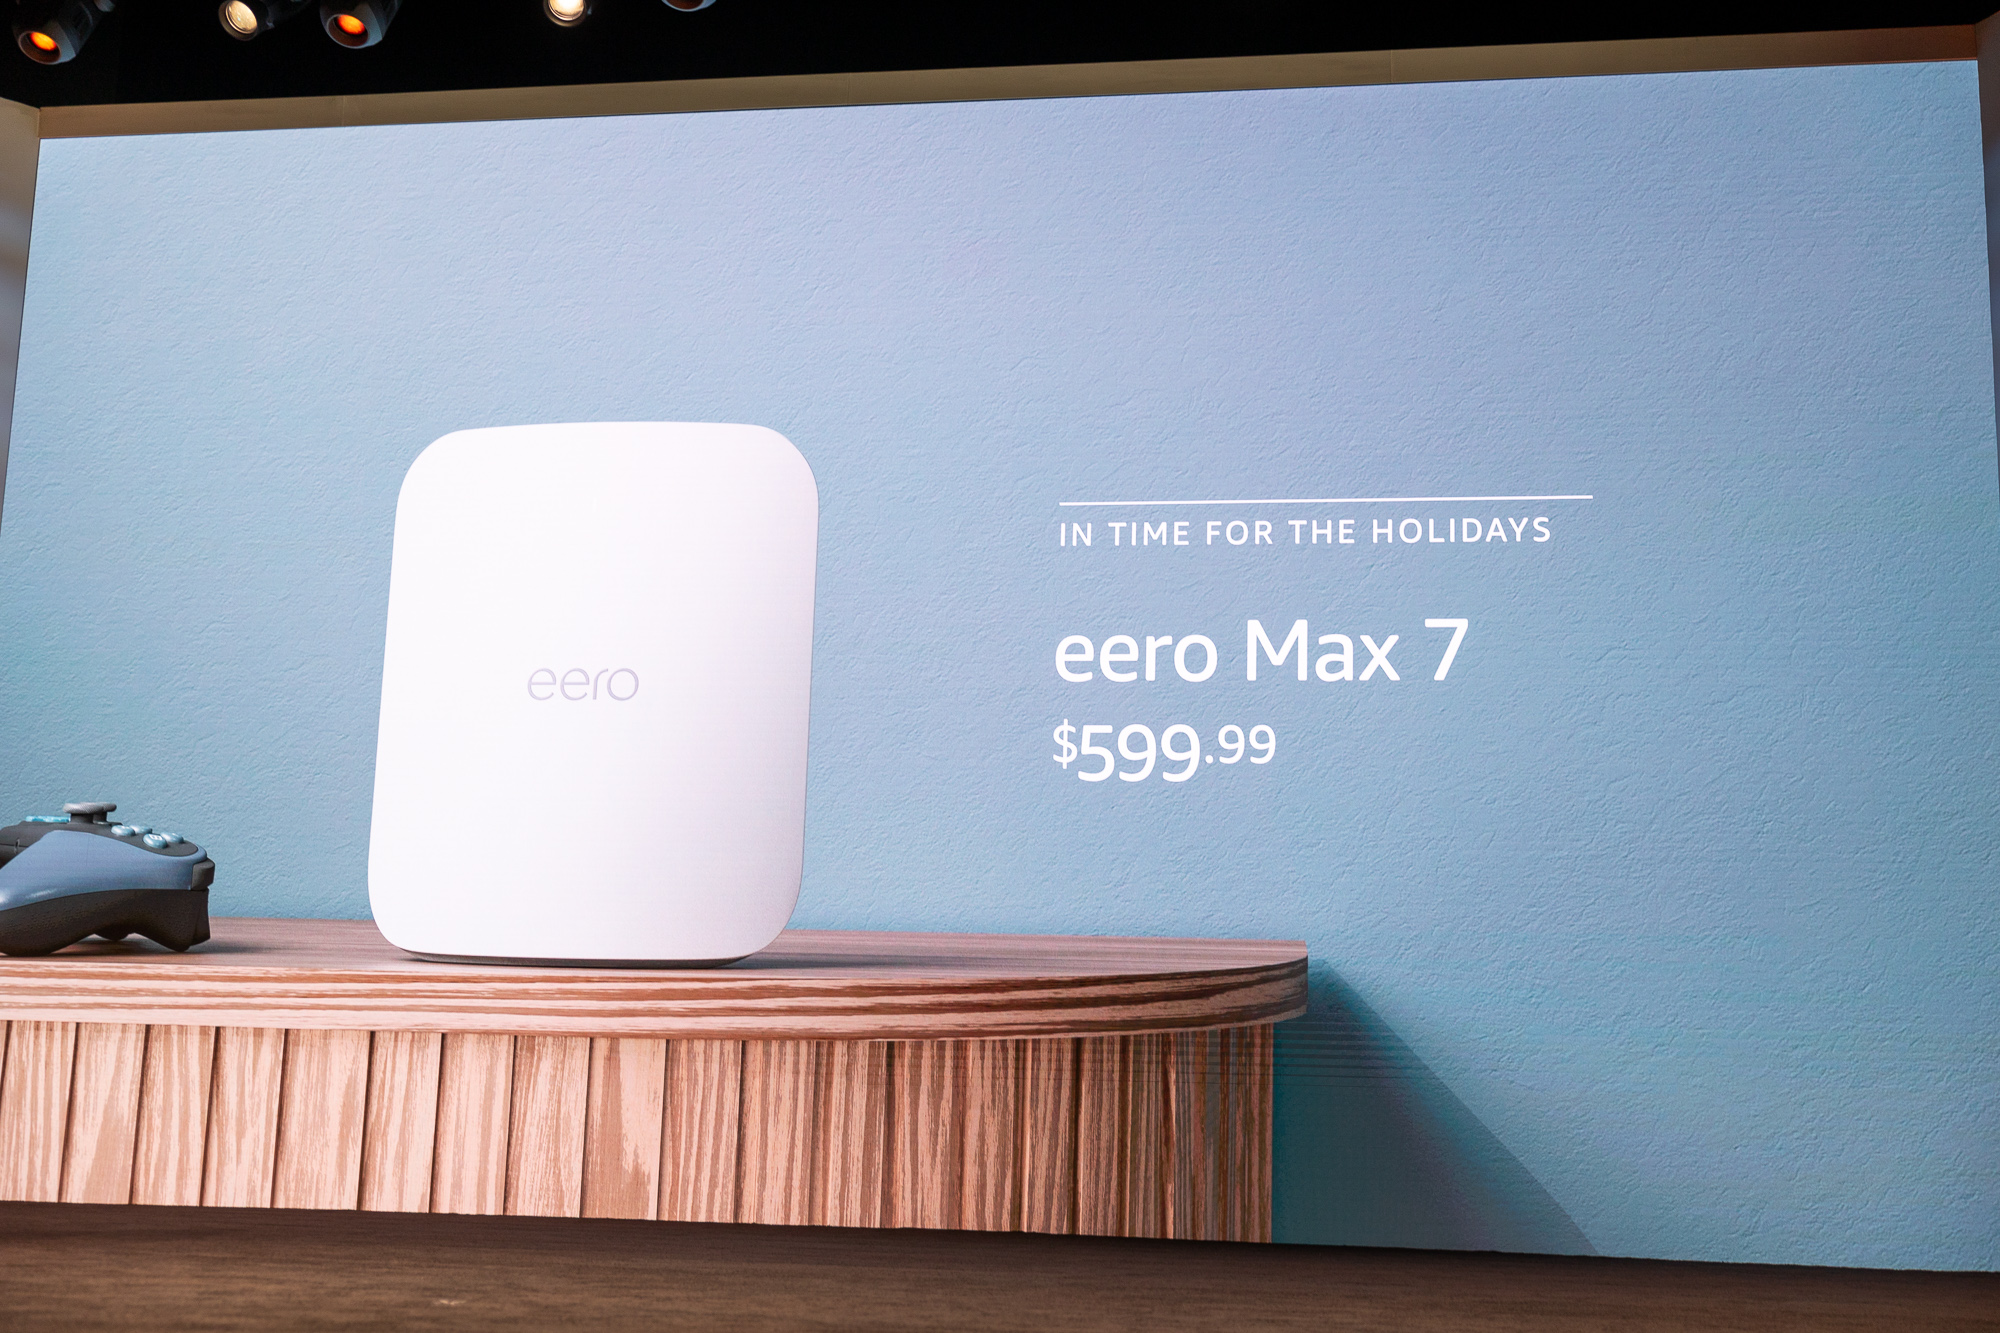 A slide showing the price of the Eero Max 7 router.